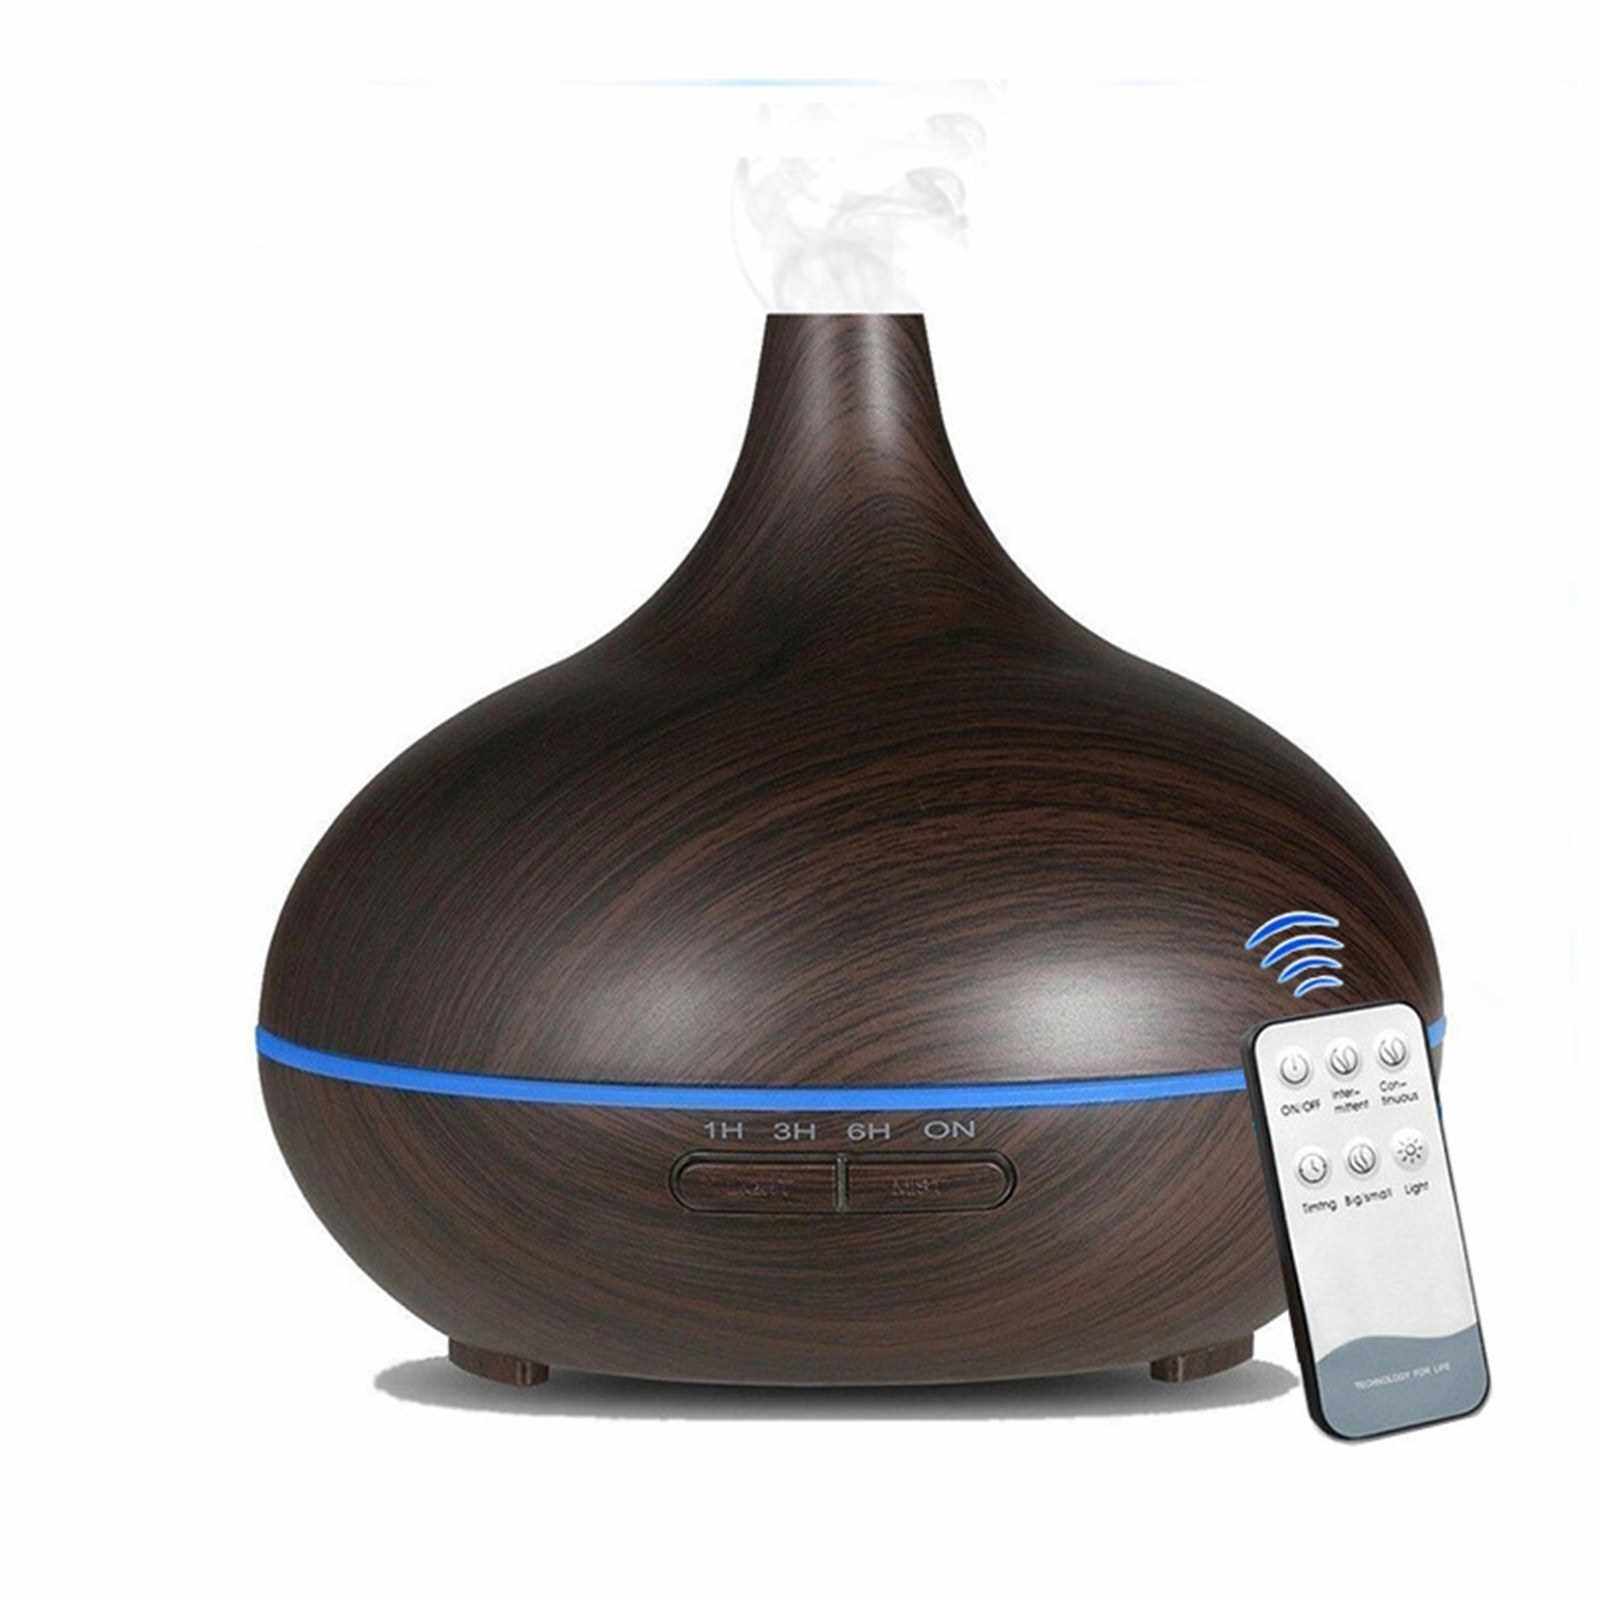 550mL Essential Oil Diffuser Mist Humidifier Diffuser Colorful Night Light Quiet Auto-Shut Off Humidifier with Remote Control Cool Desktop Humidifier for Home Office Bedroom (Khaki)